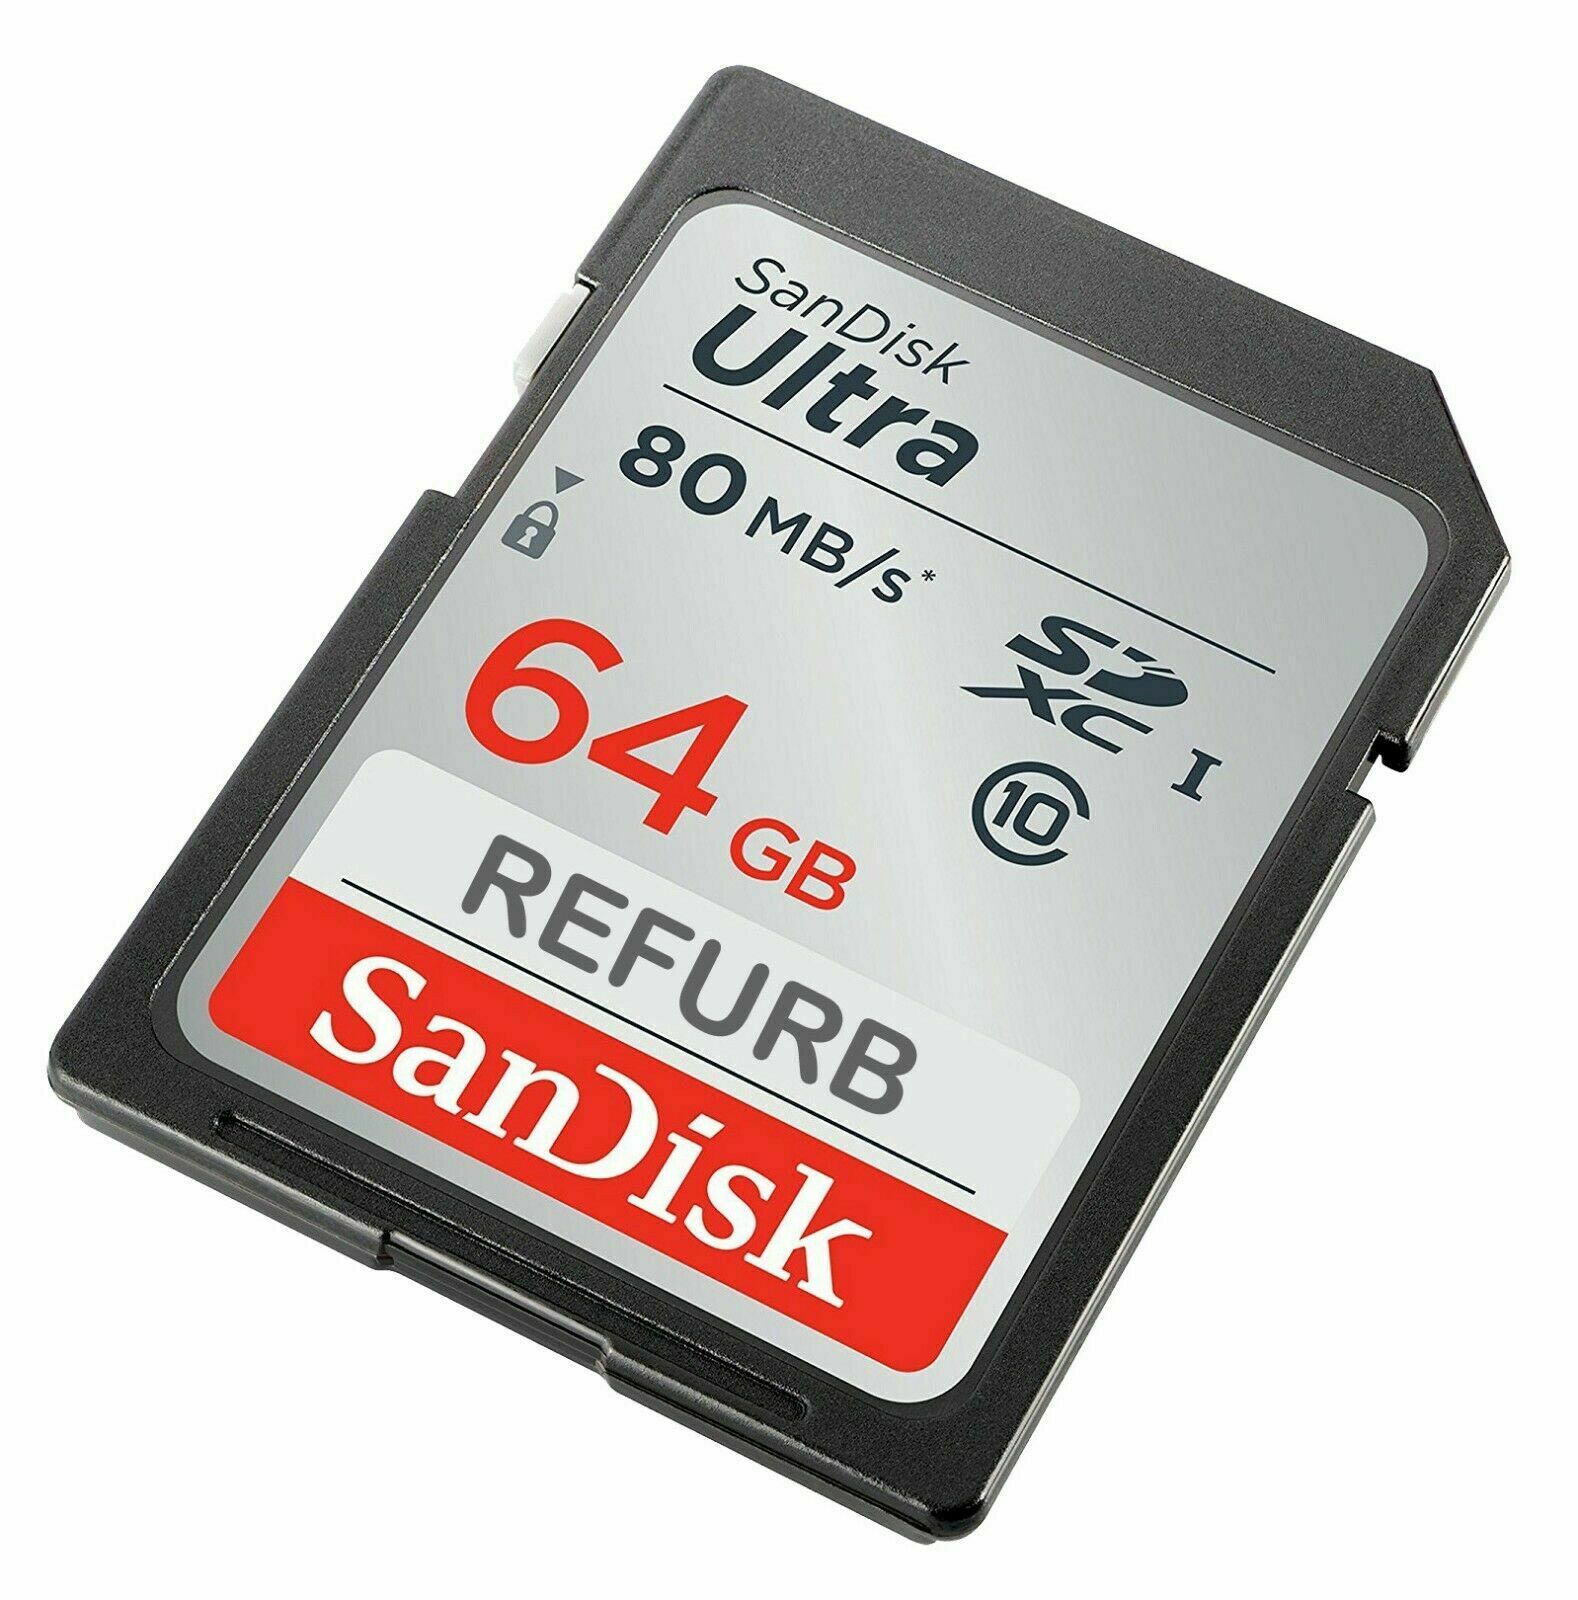 SanDisk 64GB Ultra Class 10 UHS-I SD 80MBs SDHC / SDXC Memorycard (Re-certified)